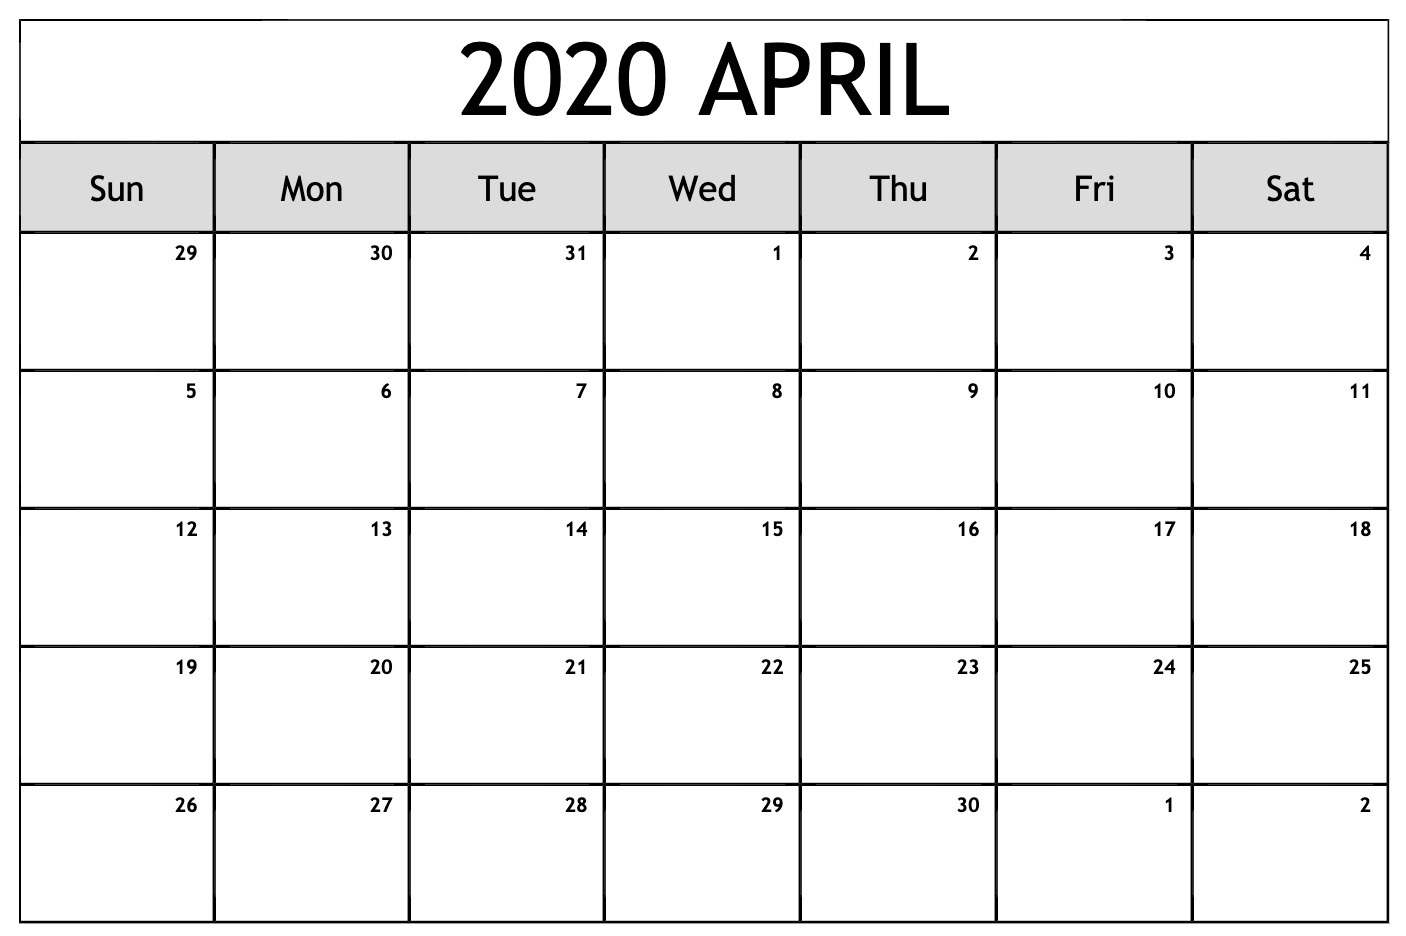 April 2020 Monthly Business Calendar | Free Printable